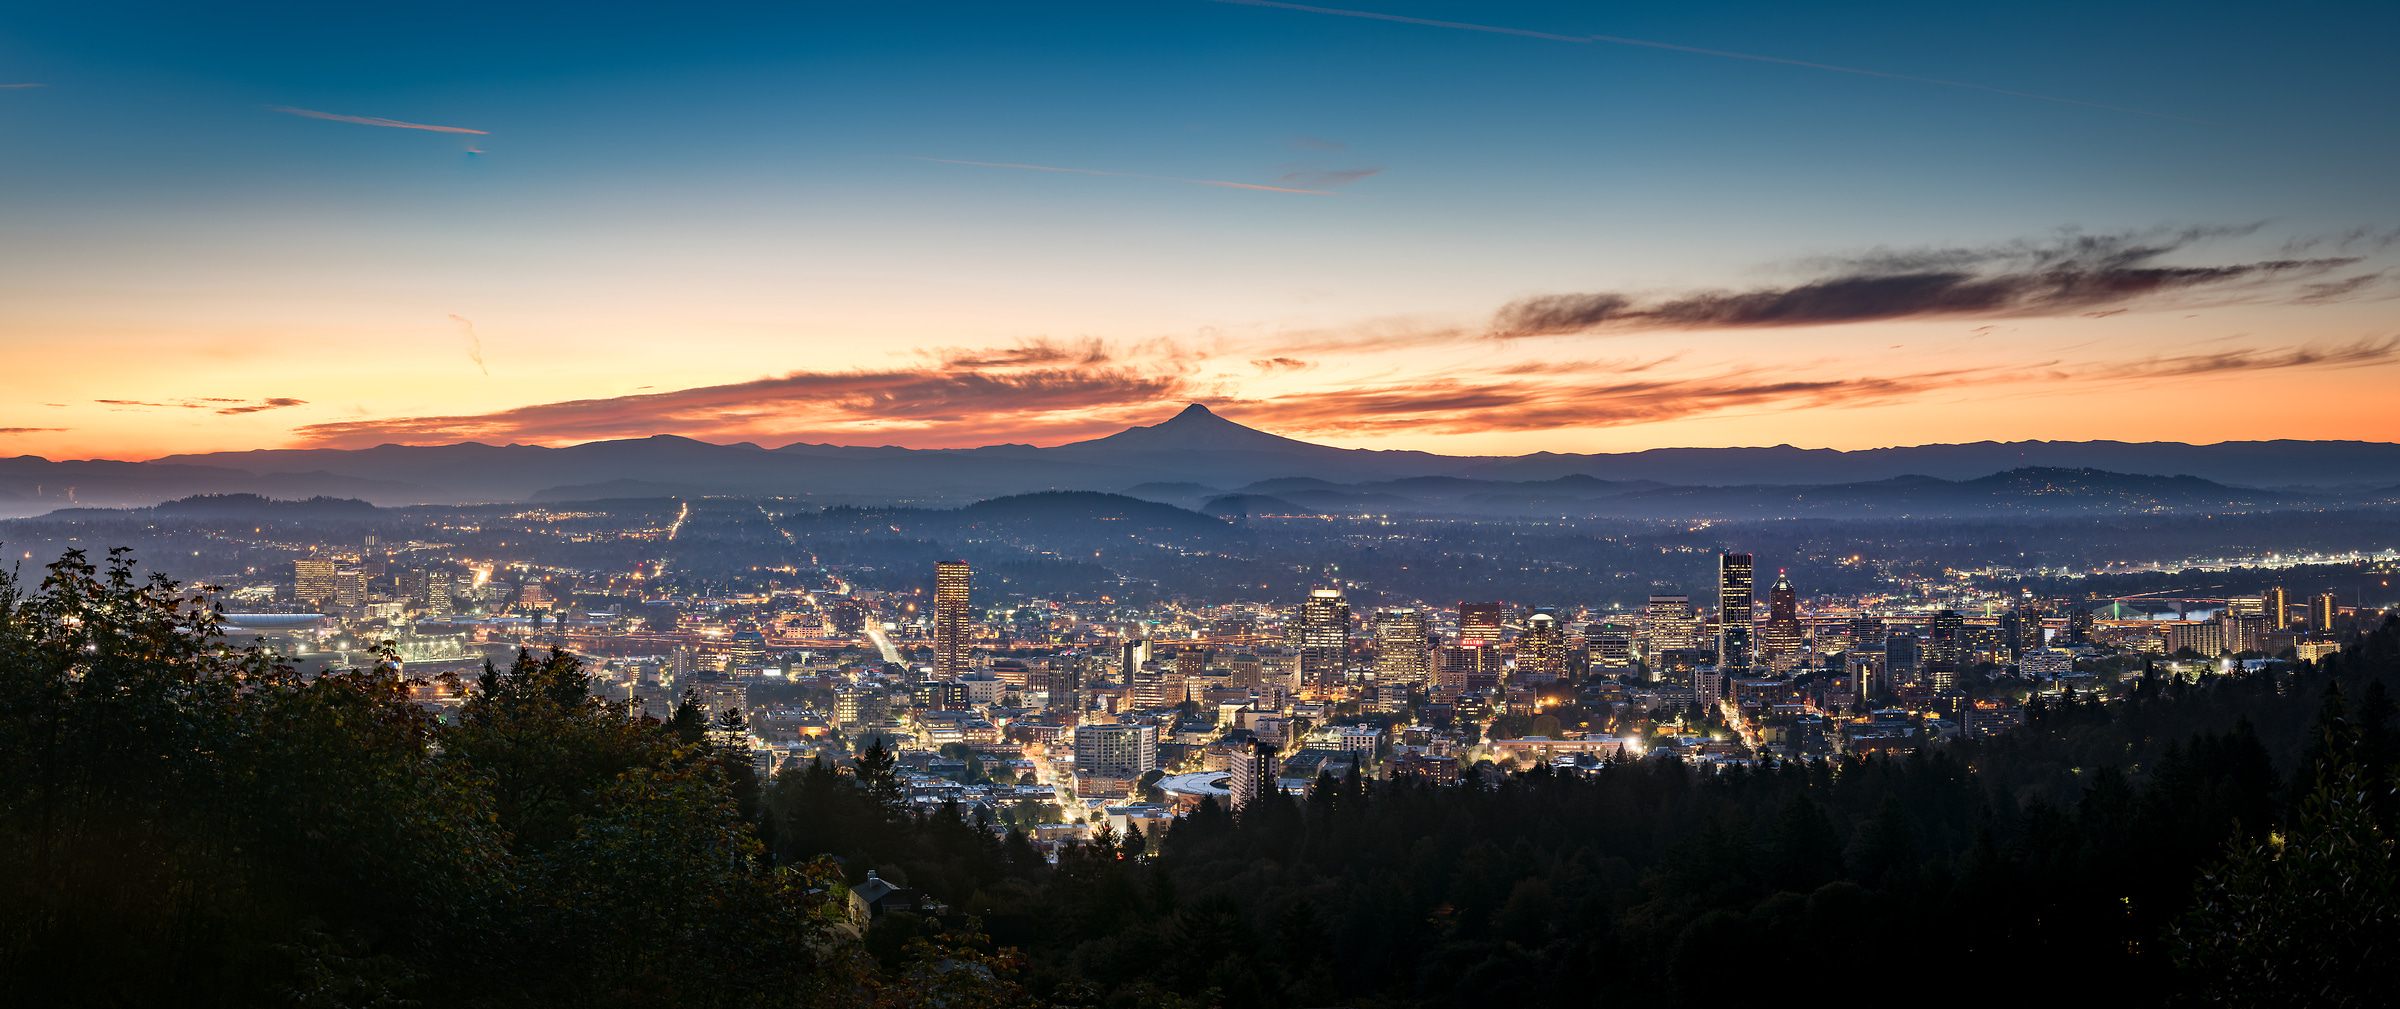 197 megapixels! A very high resolution, large-format VAST photo print of the Portland skyline; cityscape photograph created by Justin Katz in Portland, Oregon.